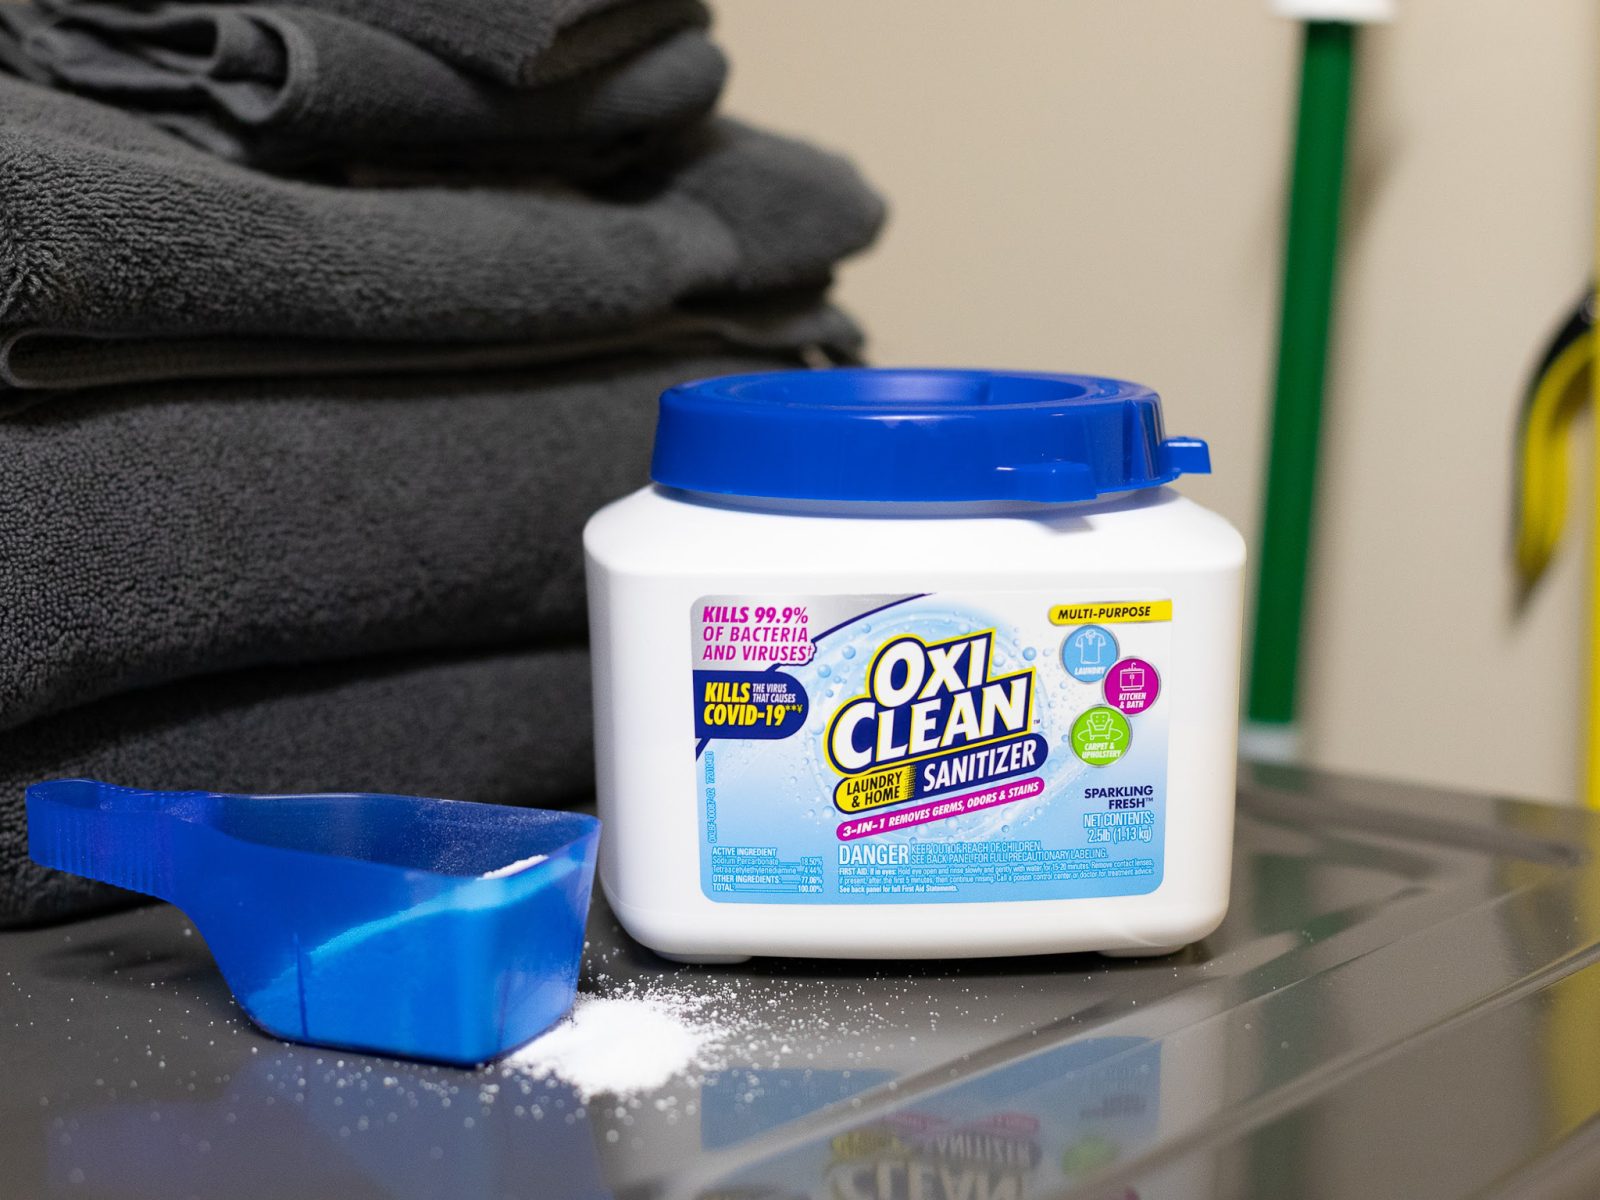 Choose OxiClean™ Laundry & Home Sanitizer & Clean Up Life’s Everyday Messes